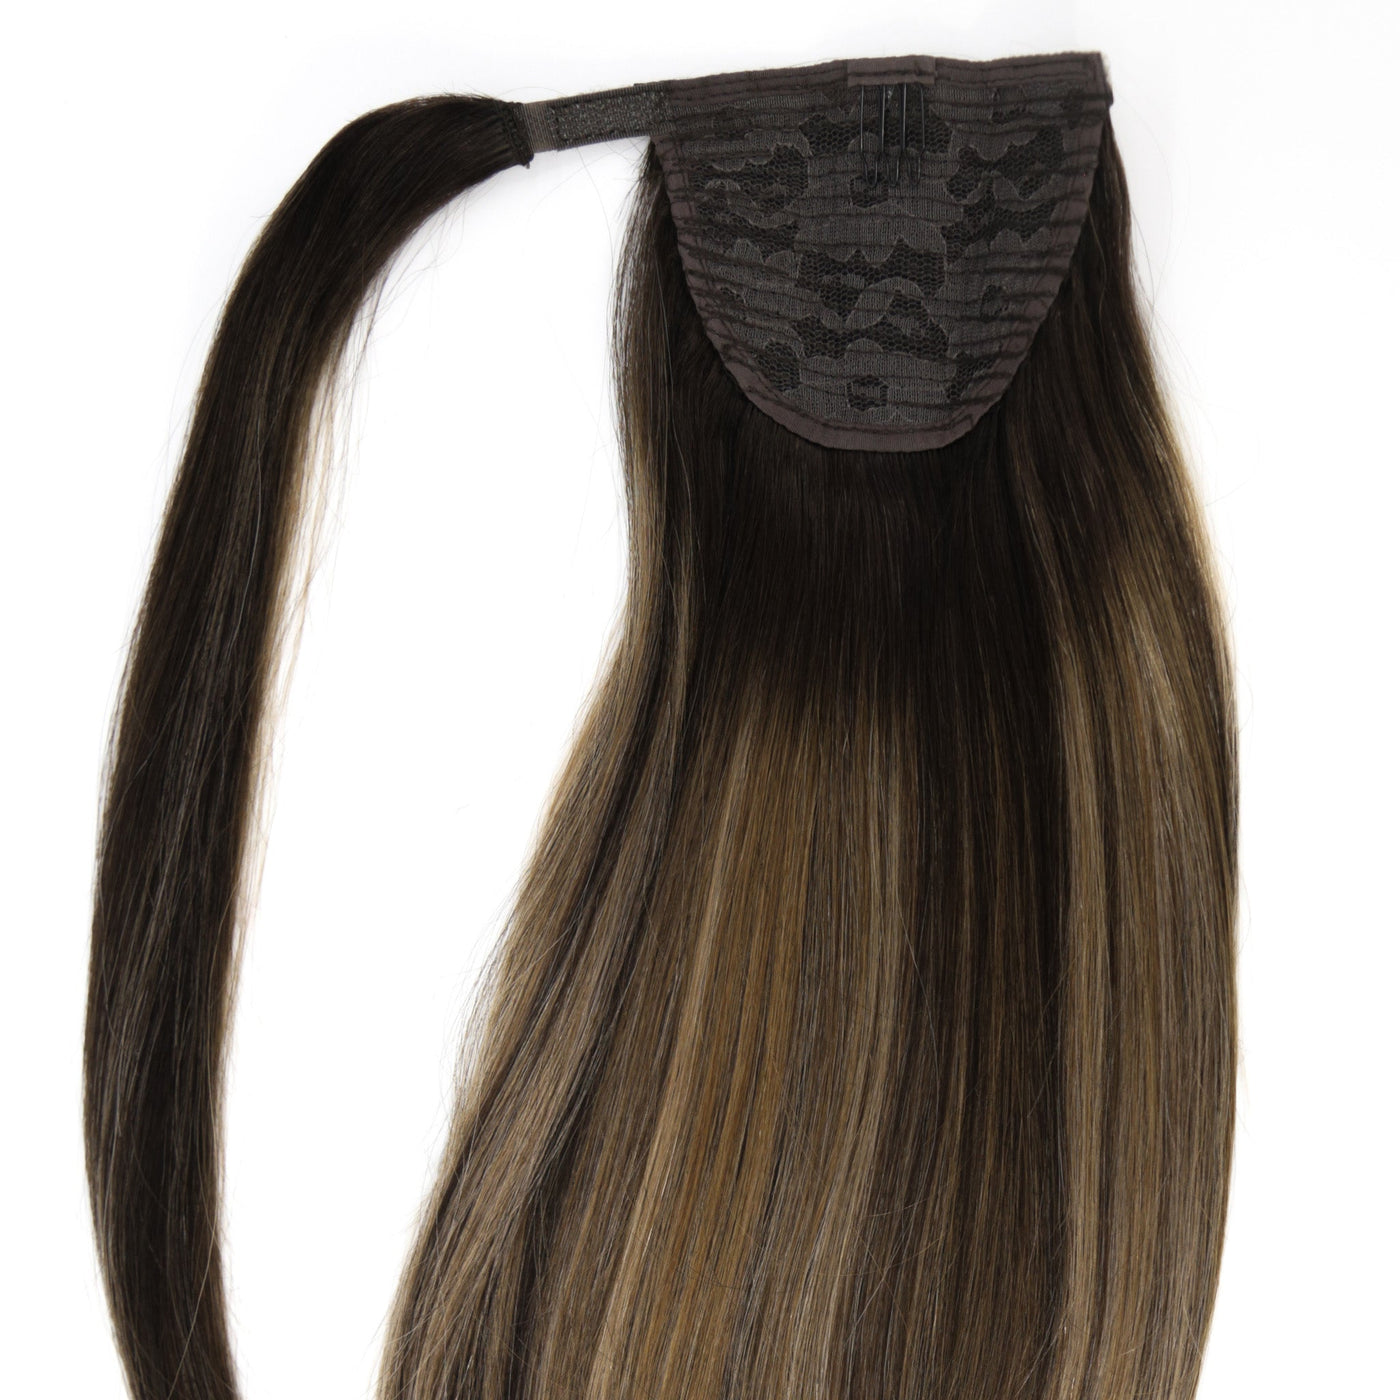 Pacific Balayage AquaLyna Ponytail Hair Extension